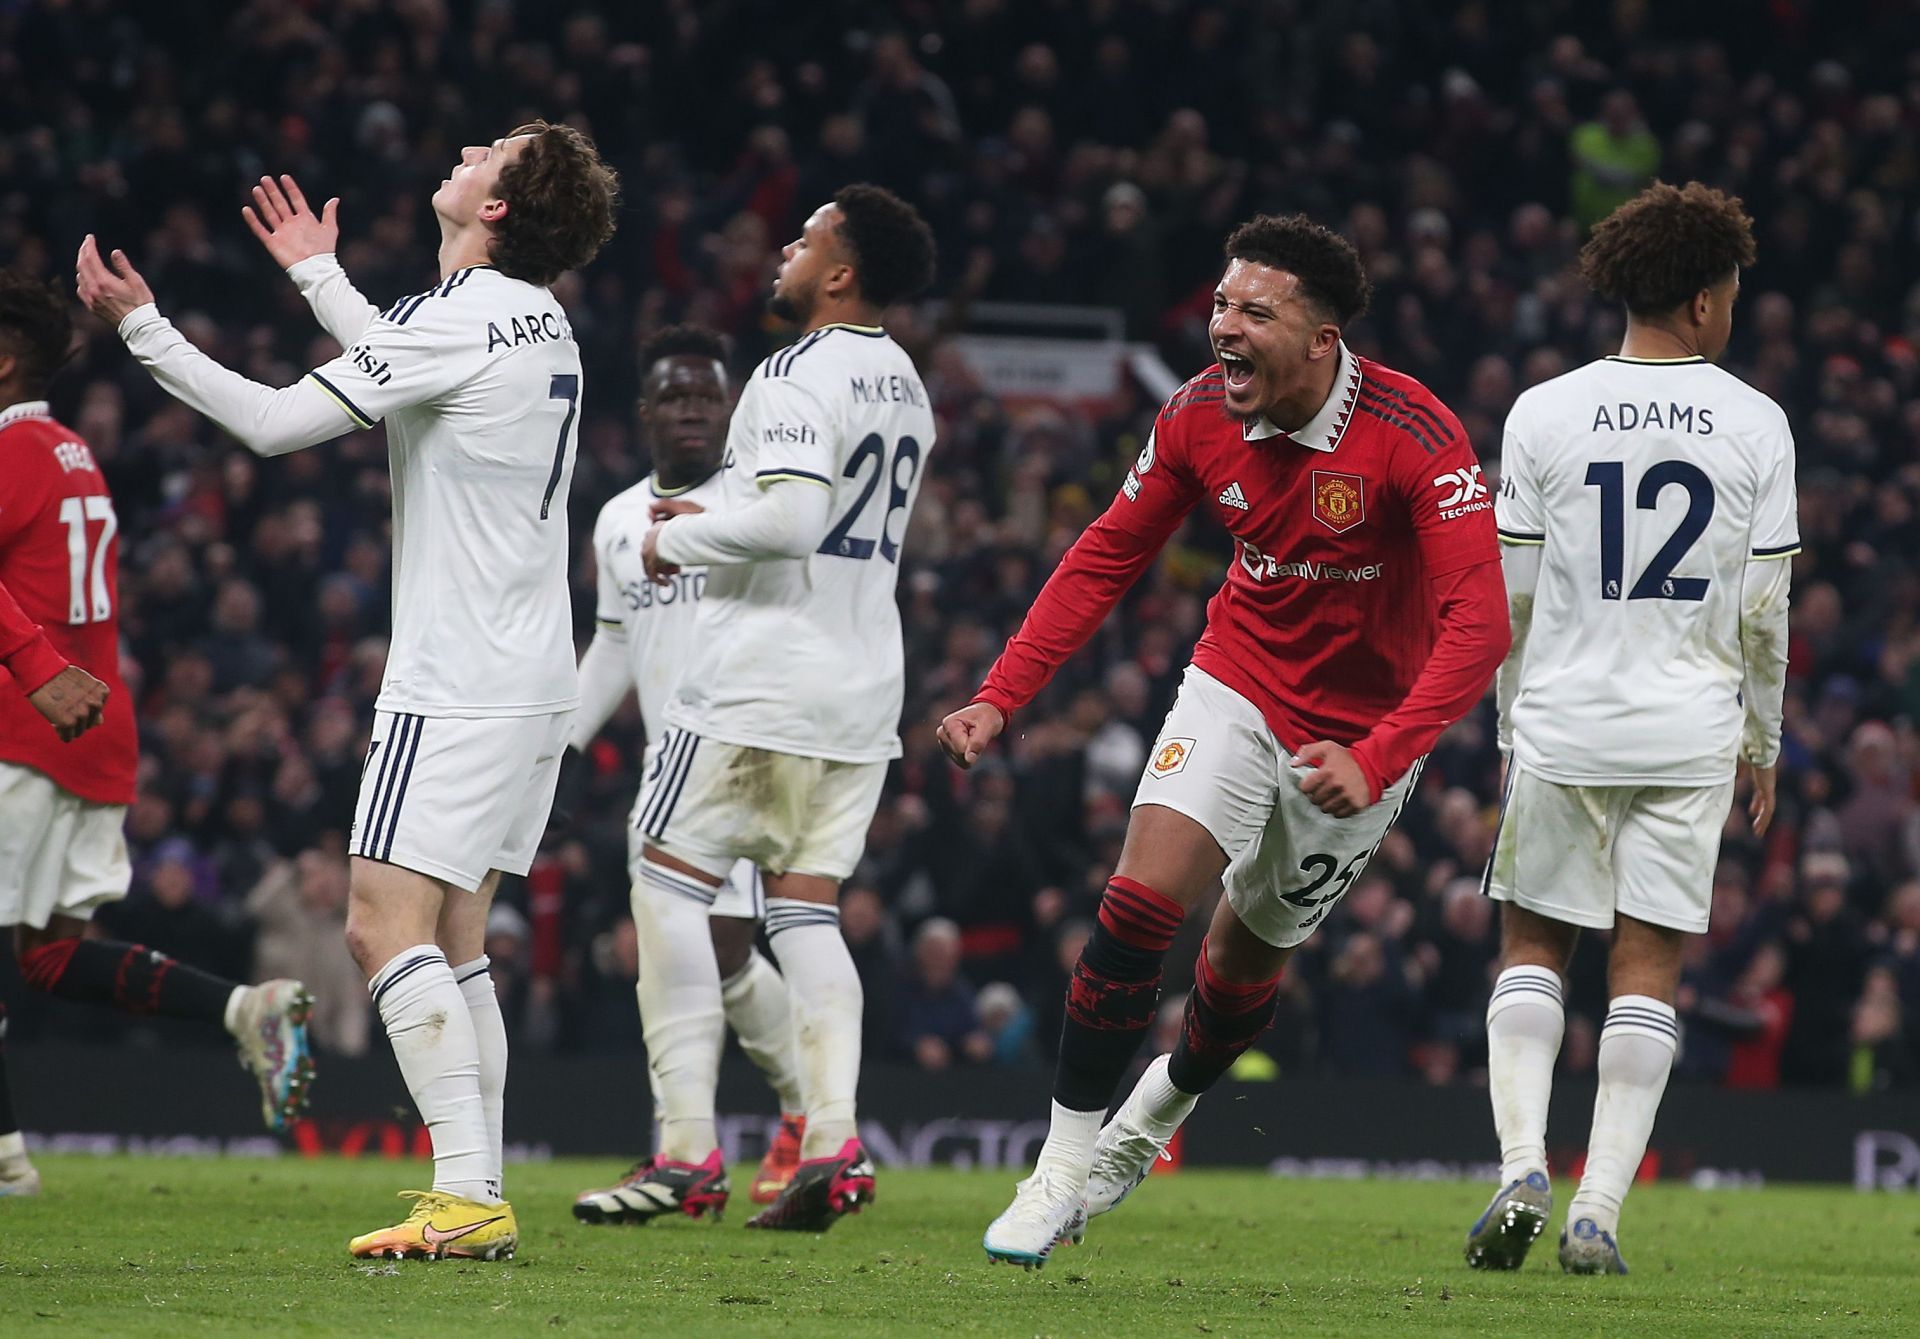 Jadon Sancho scored as Manchester United drew 2-2 with Leeds United